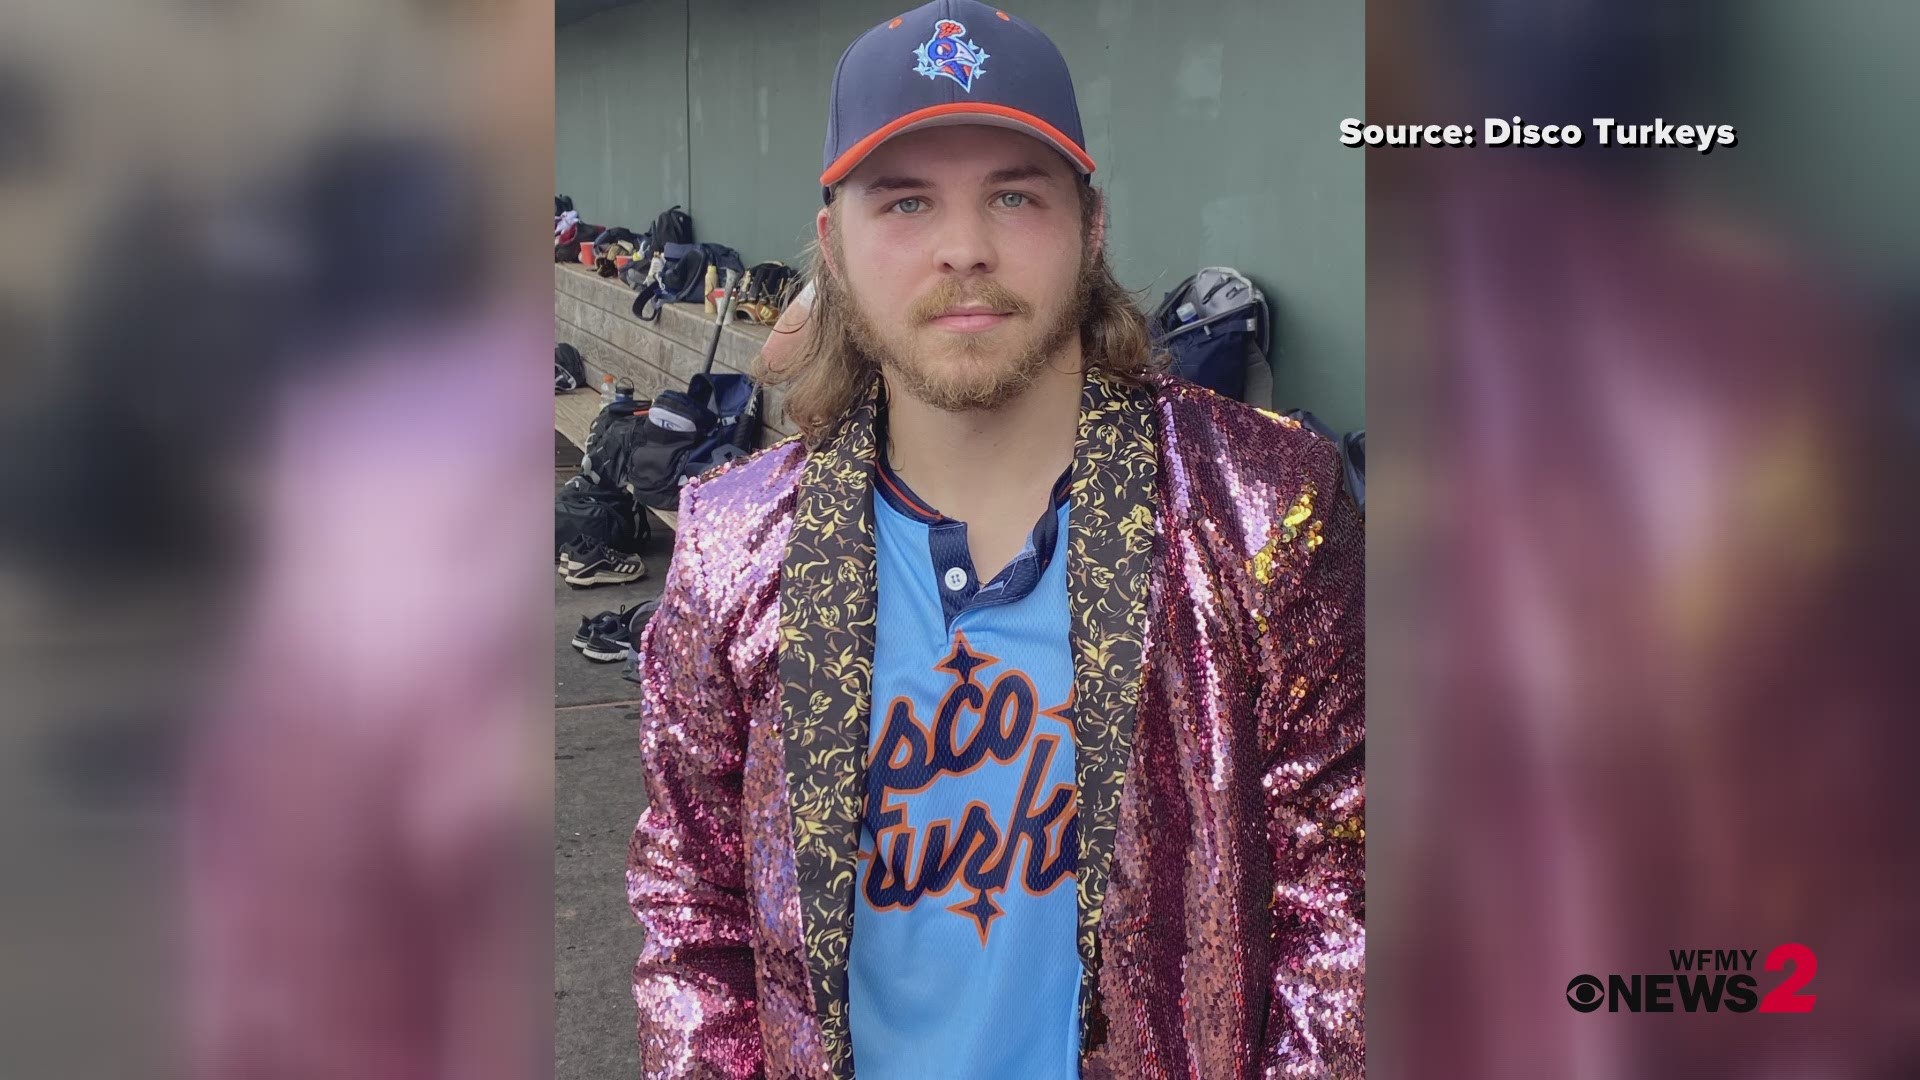 When a Carolina Disco Turkeys' player hits a home run, his teammates will give him a purple sequins jacket to wear.